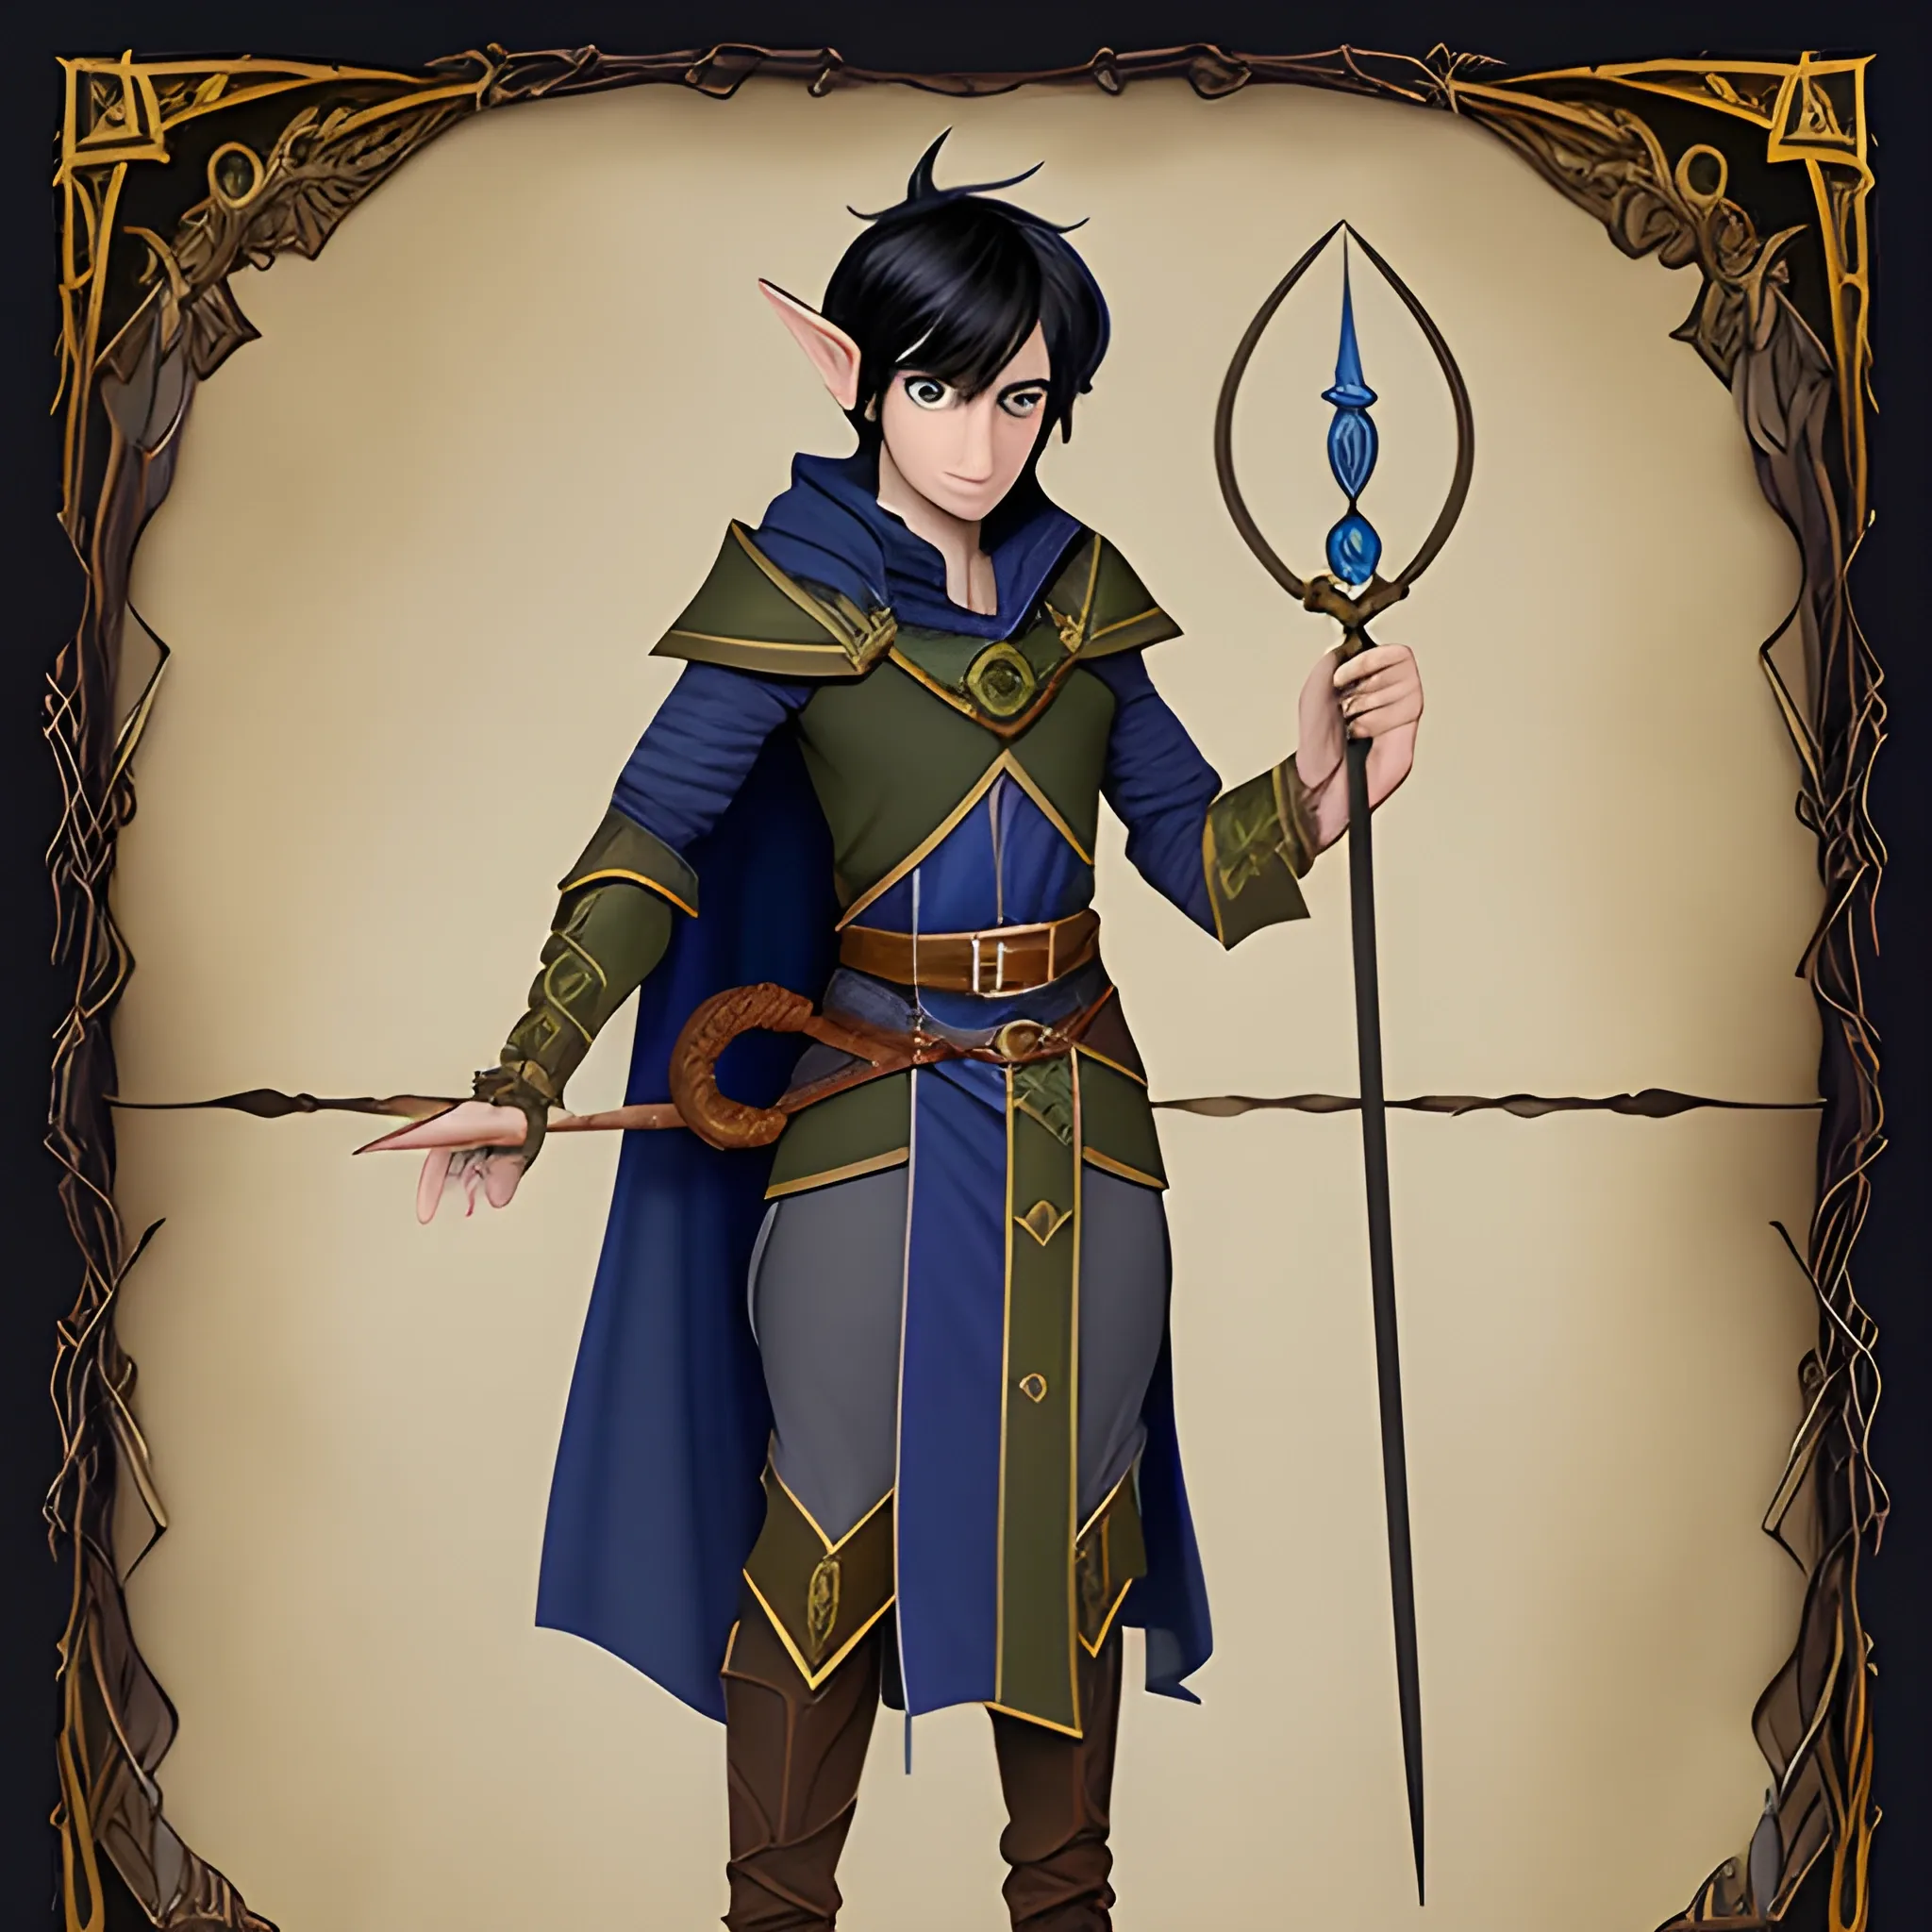 A Dungeons and Dragons elf, complete view of him, it has black hair, wears a dark blue tunic with gold details, has two horsetails, has a wizard crosier, has blue eyes